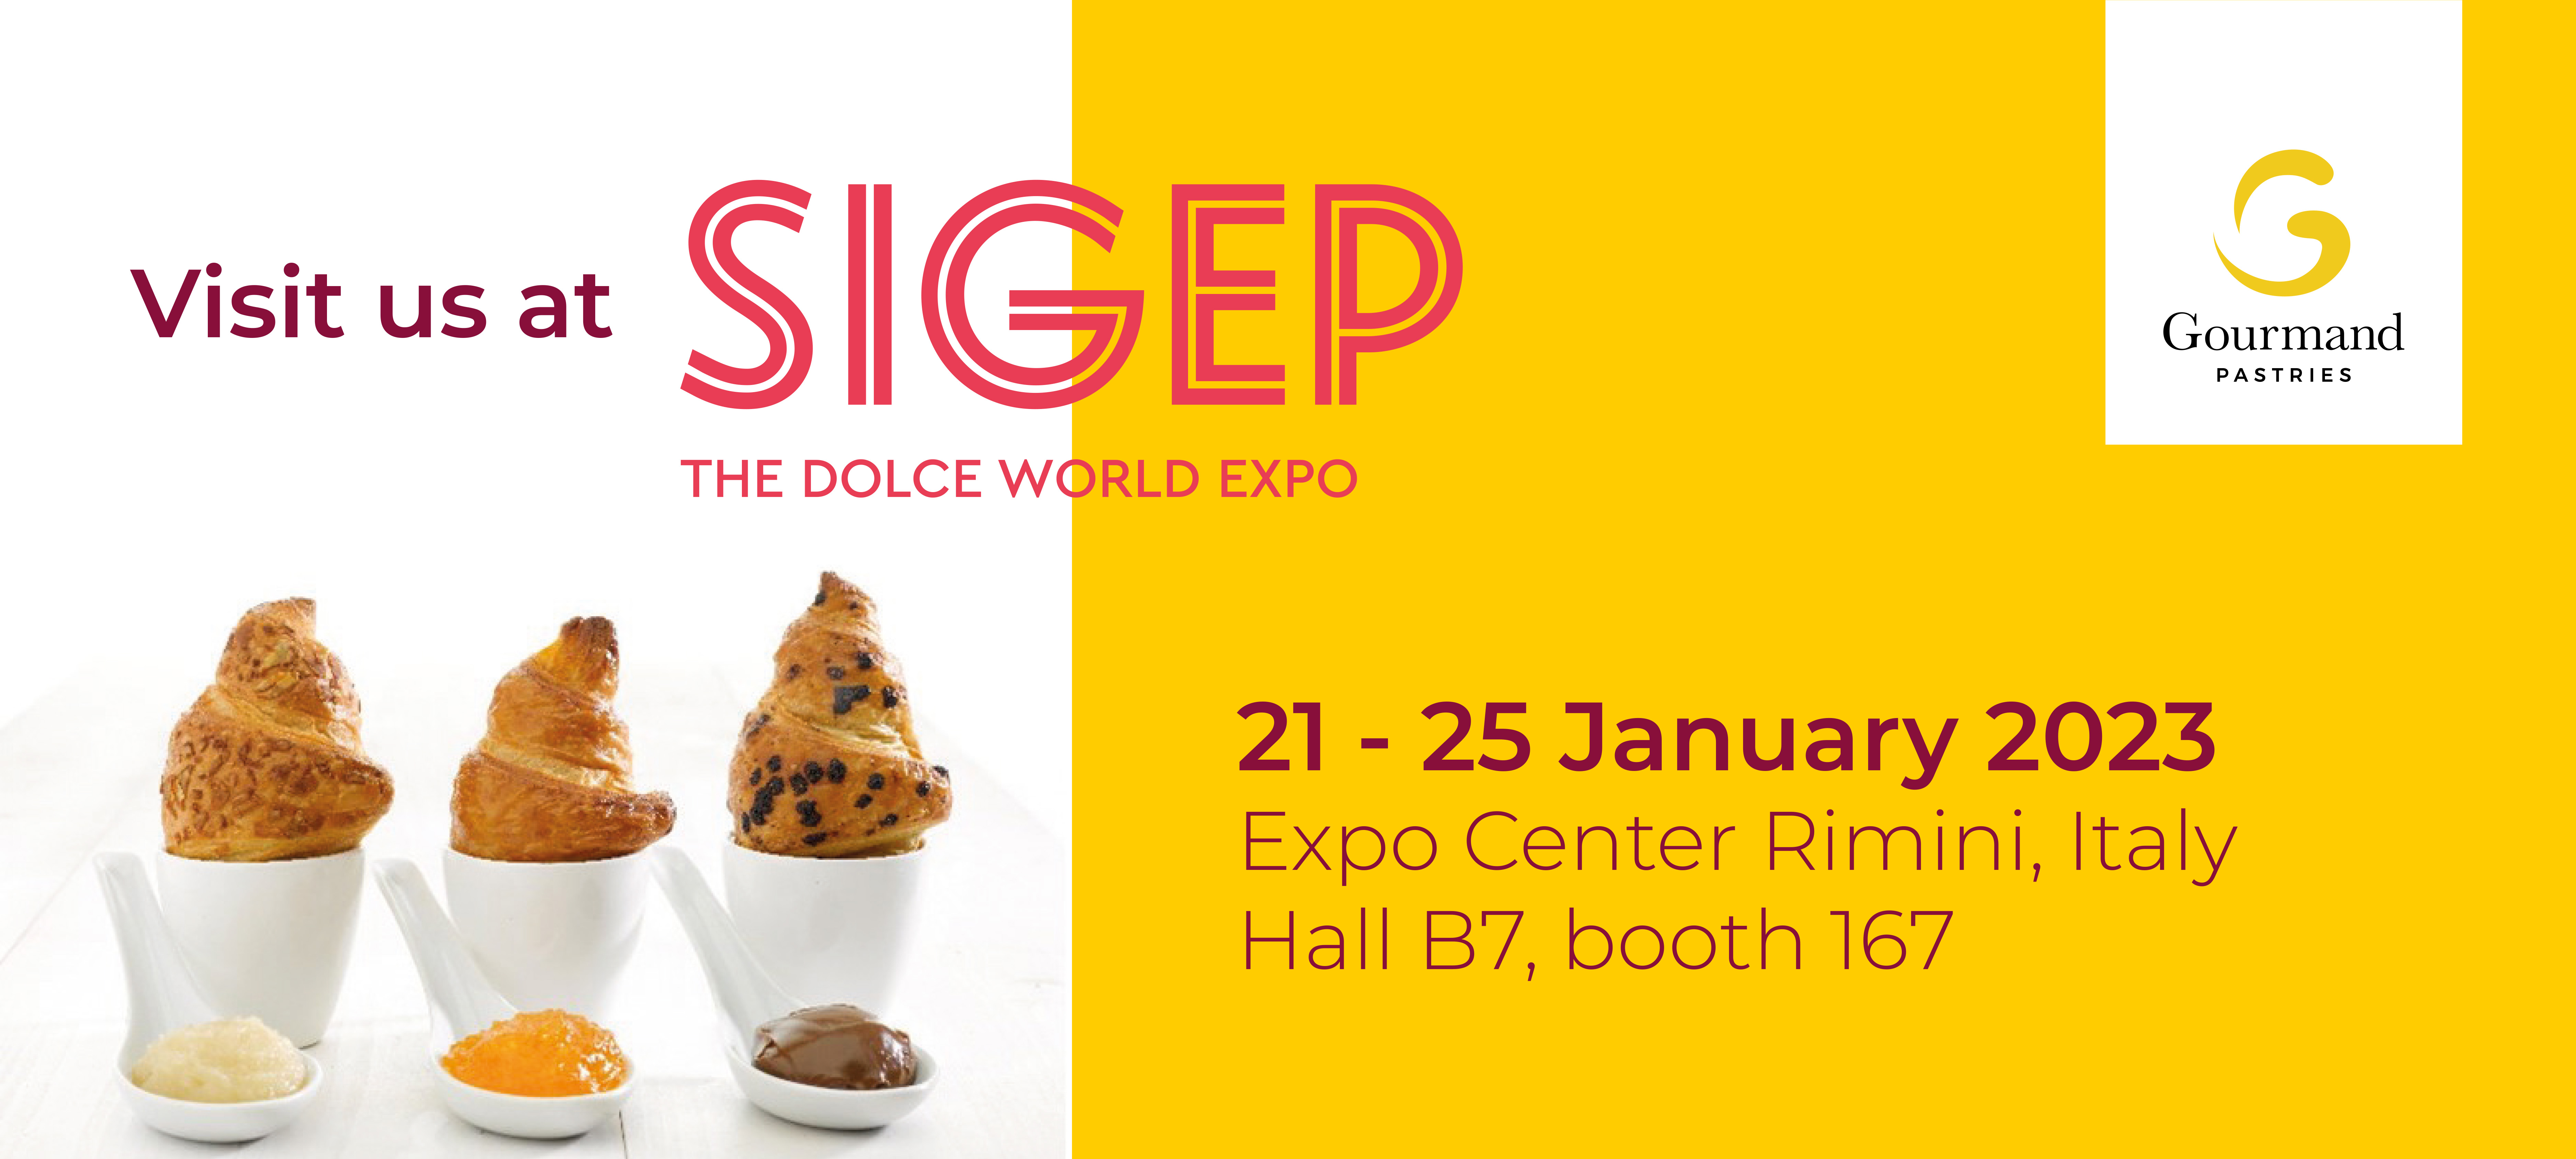 Come and discover our new products at Sigep 2023